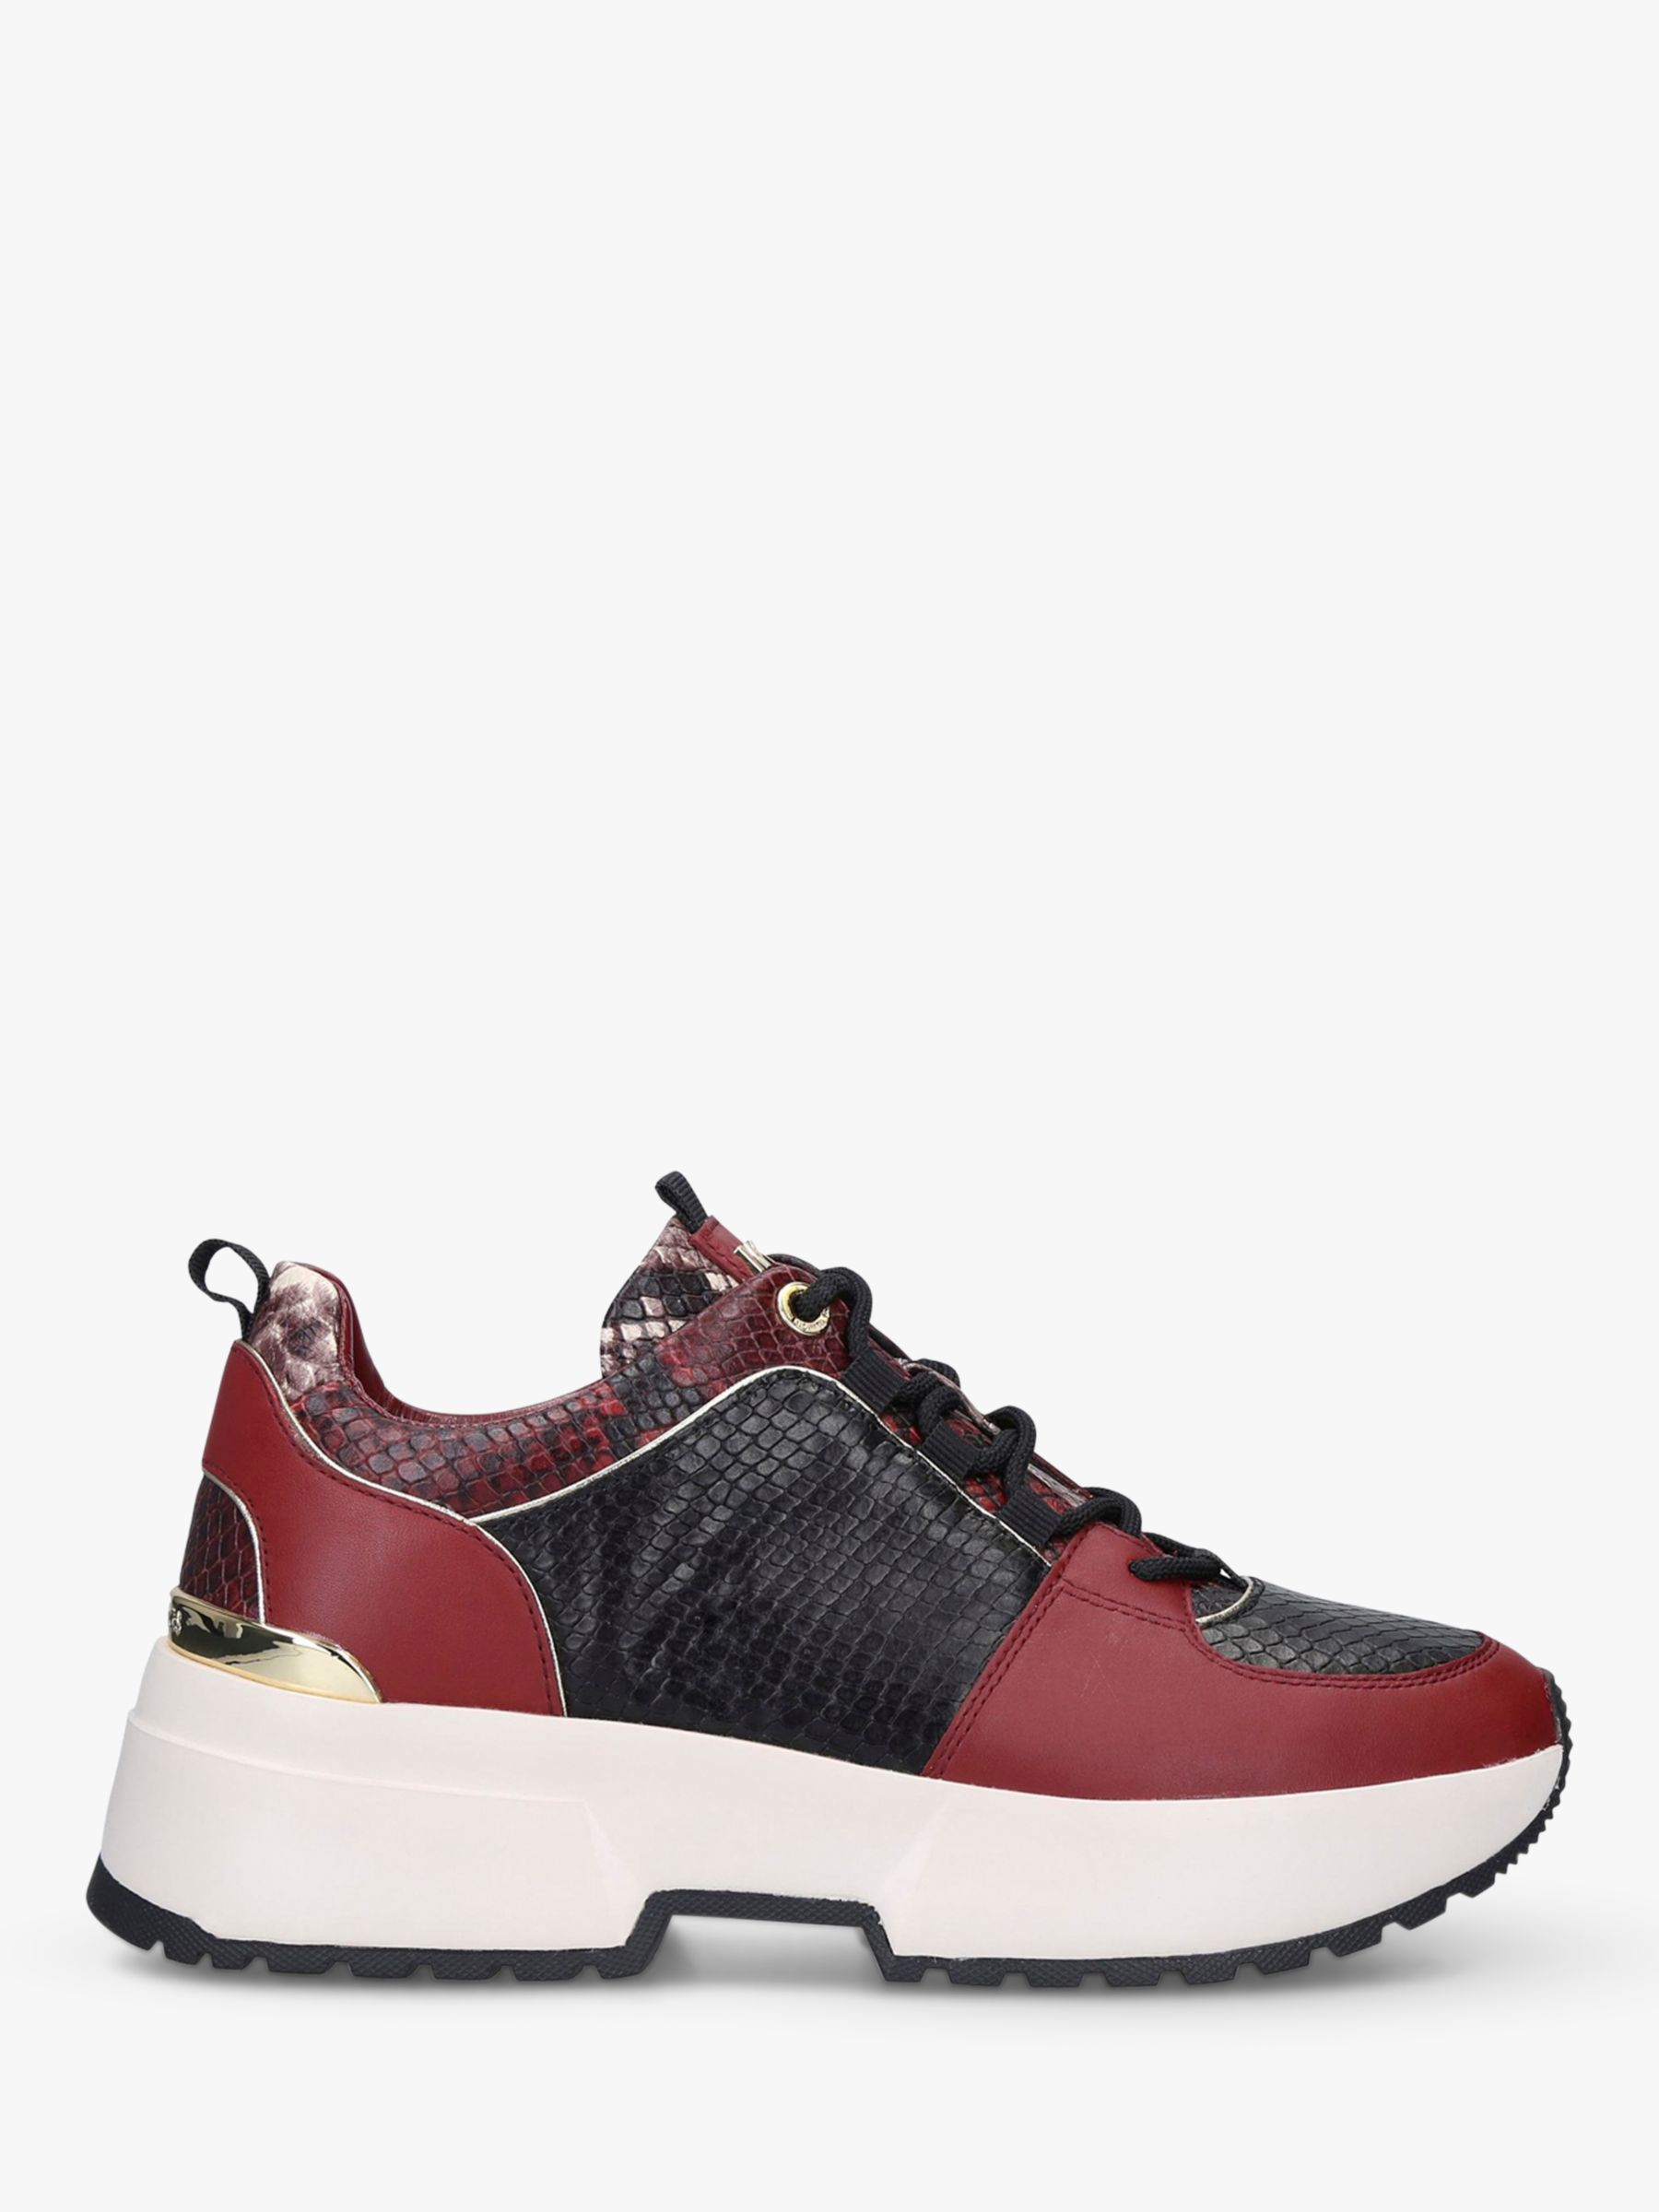 michael kors cosmo trainer red